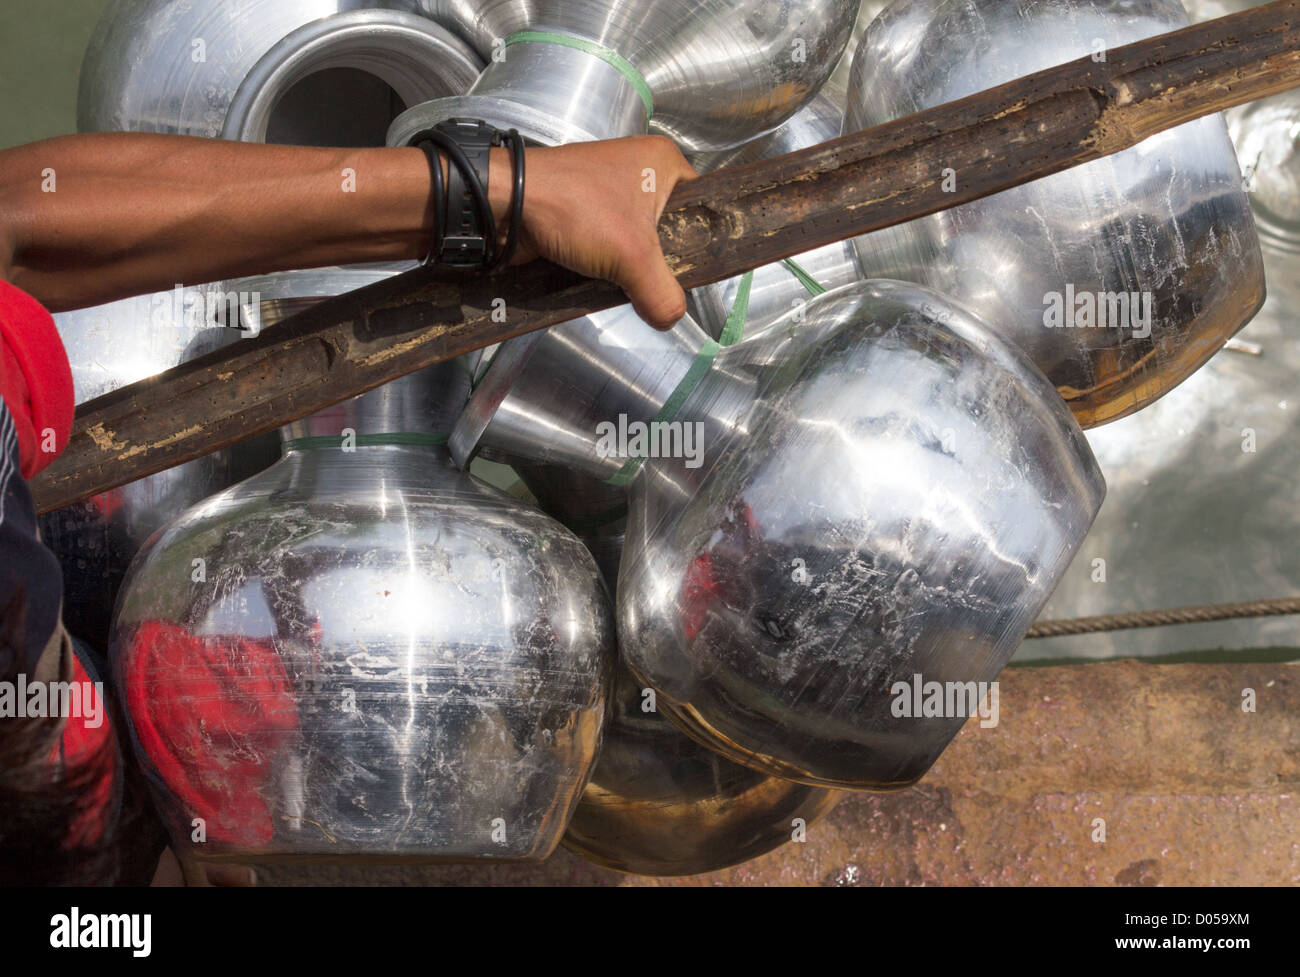 Water carriers typical of the type used in Kachin State. Stock Photo